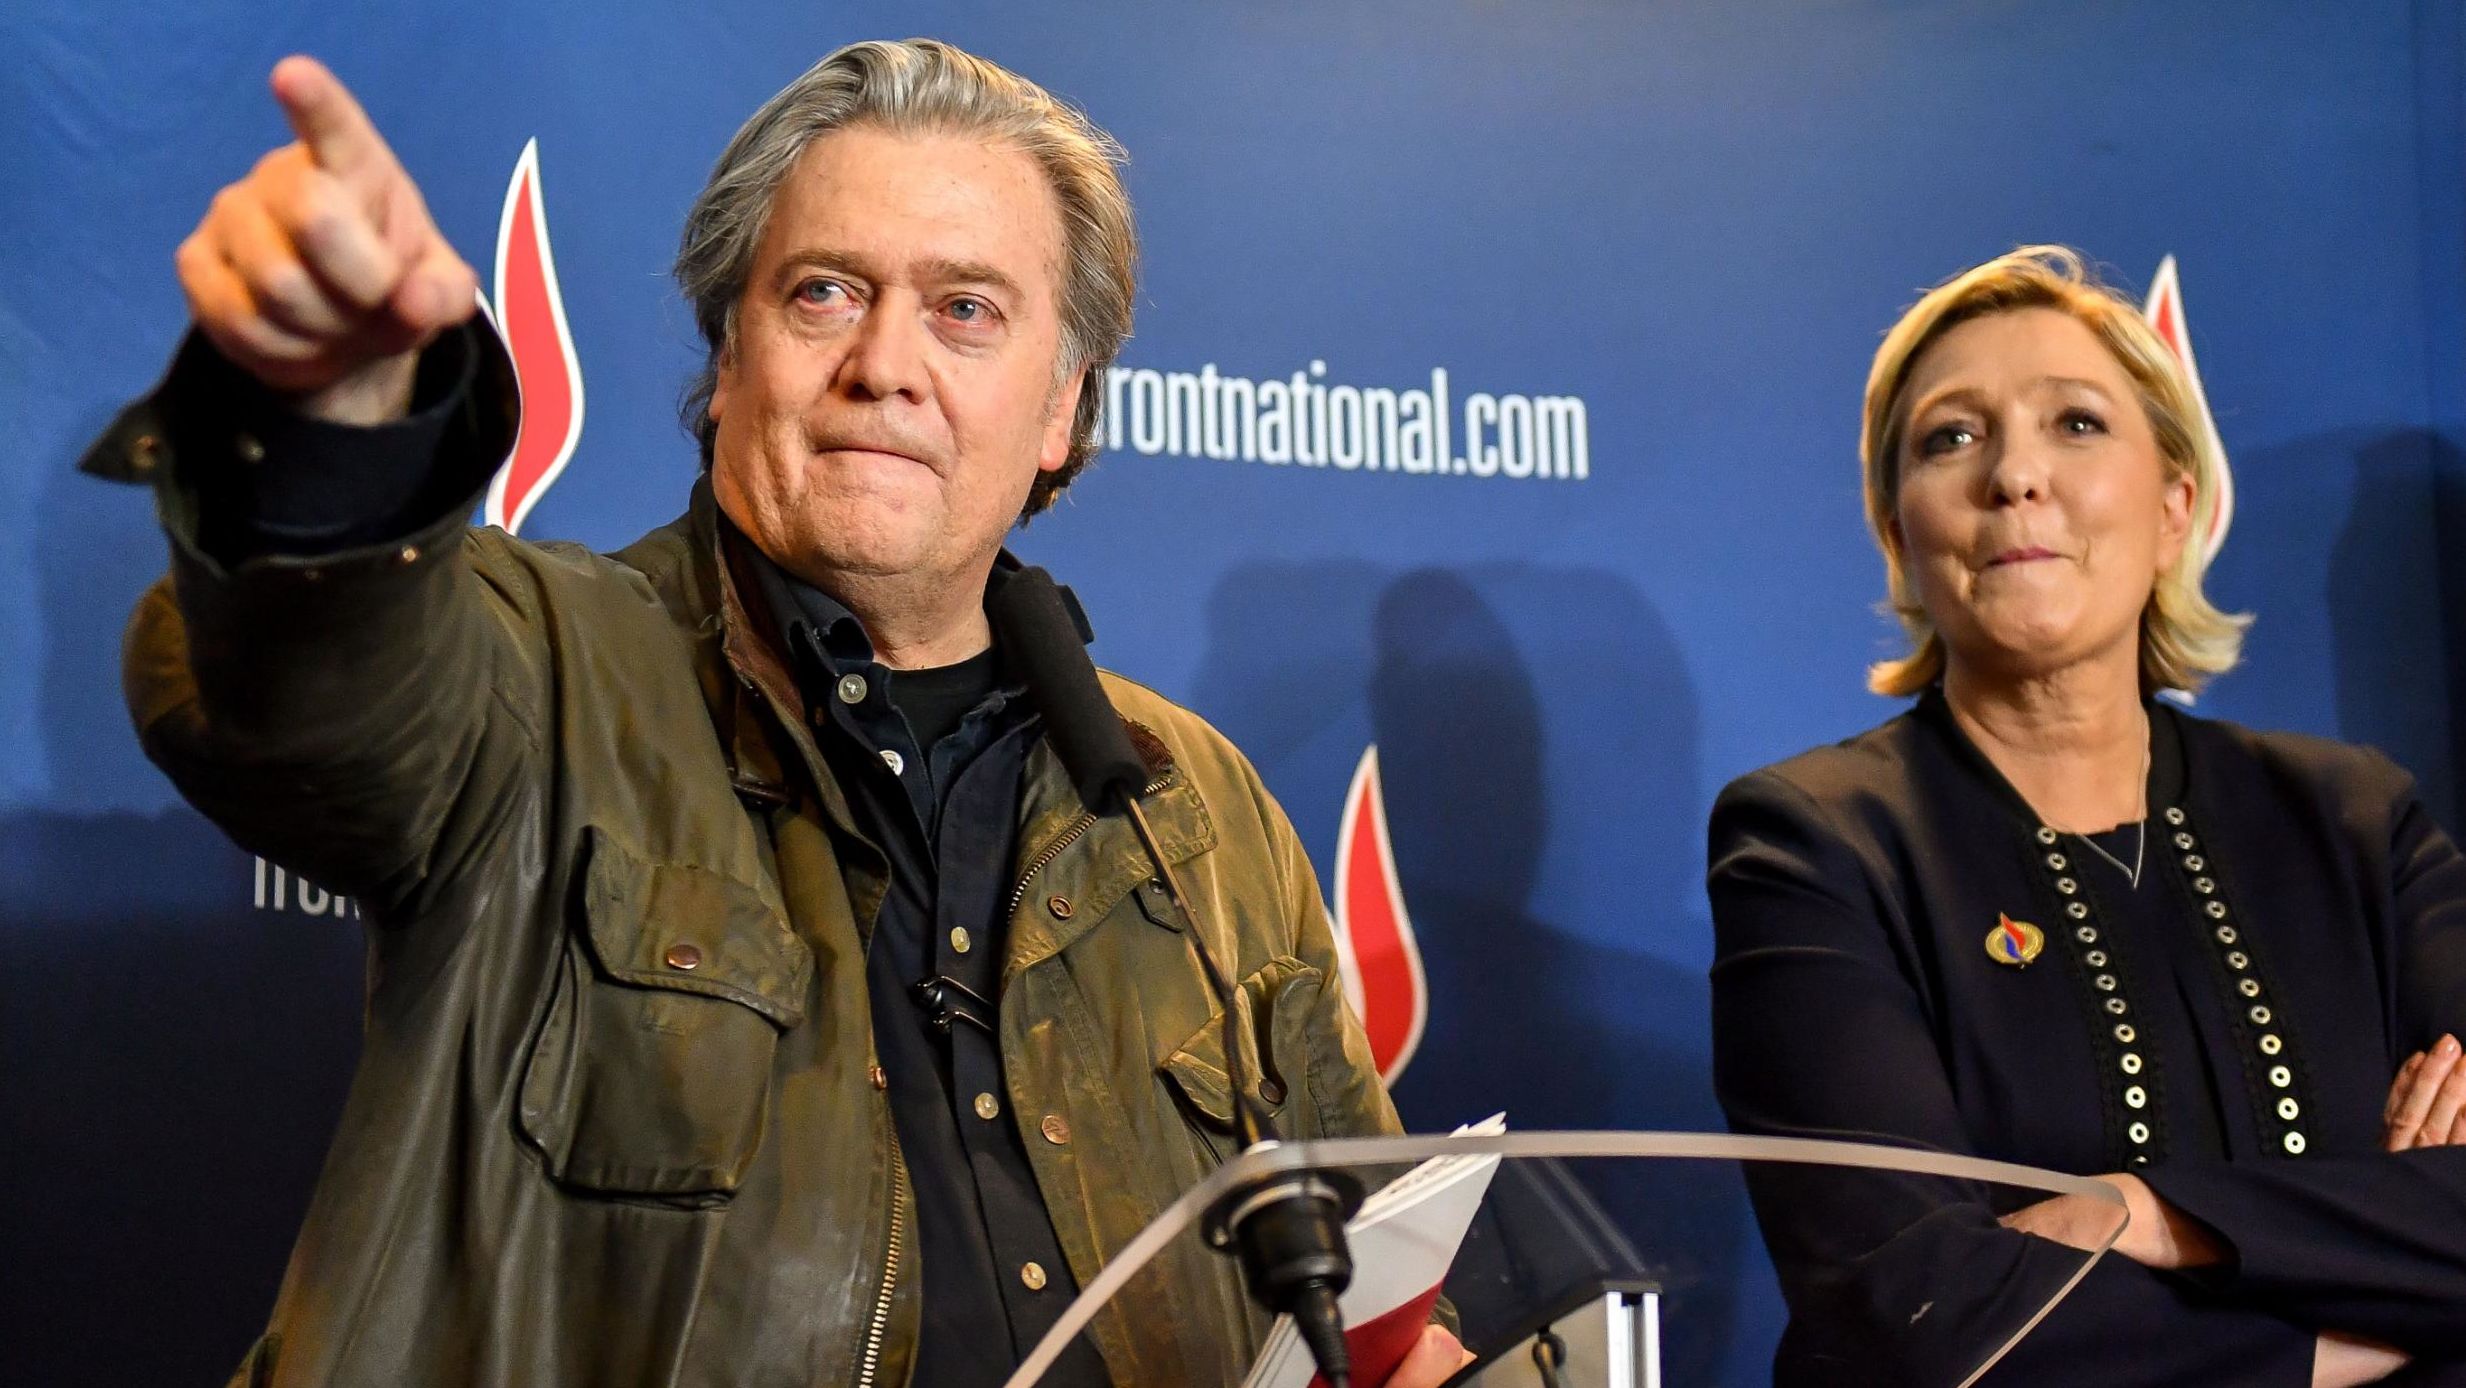 Steve Bannon, left, with France's far-right leader Marine Le Pen after giving a speech at her party's annual congress on March 10, 2018 in Lille, France.